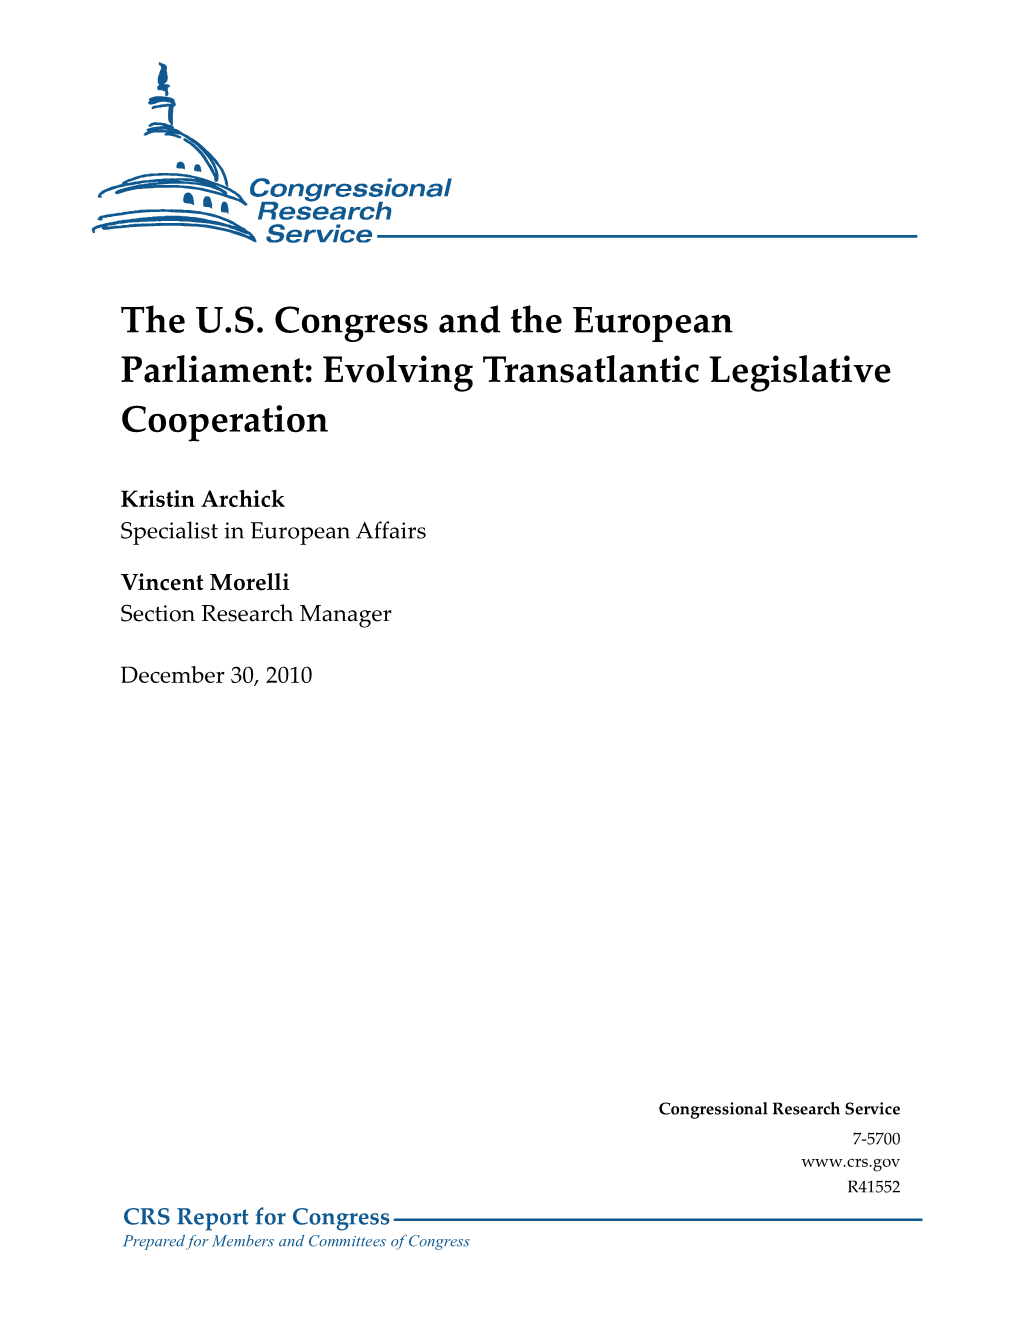 The US Congress and the European Parliament